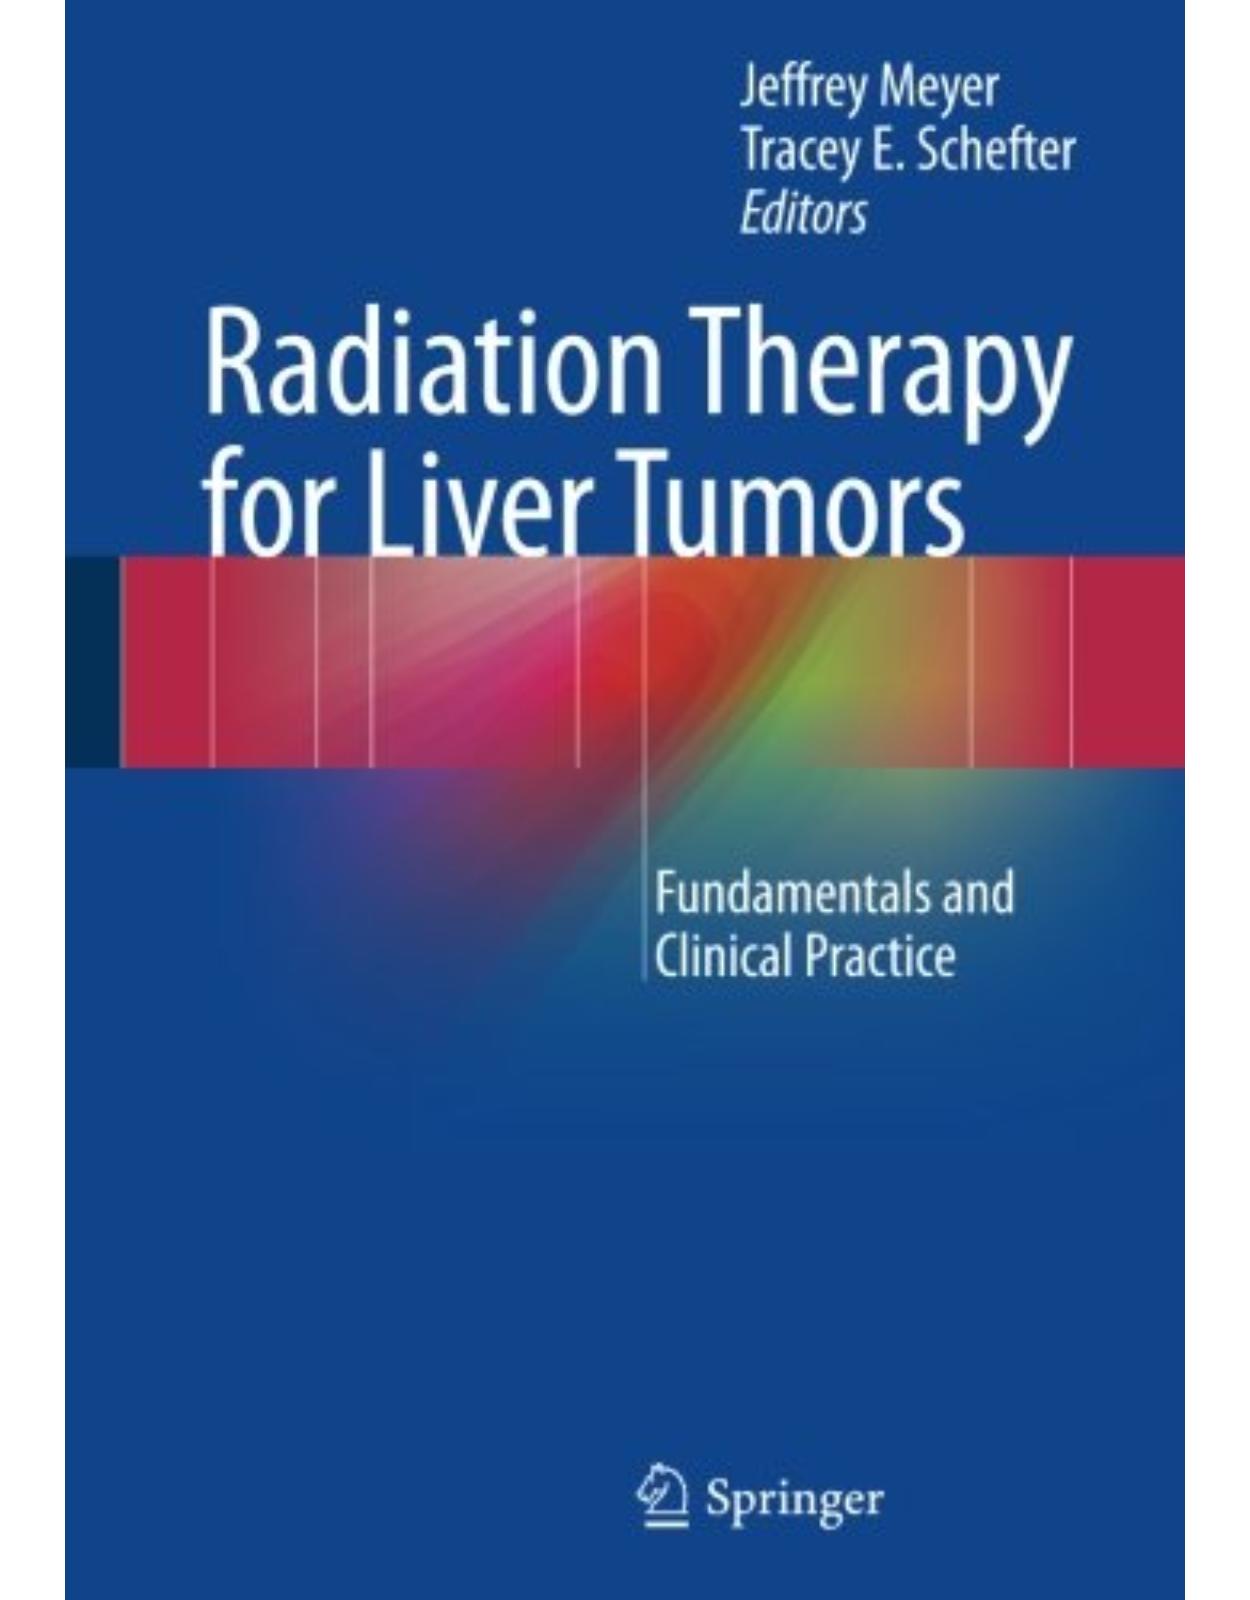 Radiation Therapy for Liver Tumors: Fundamentals and Clinical Practice